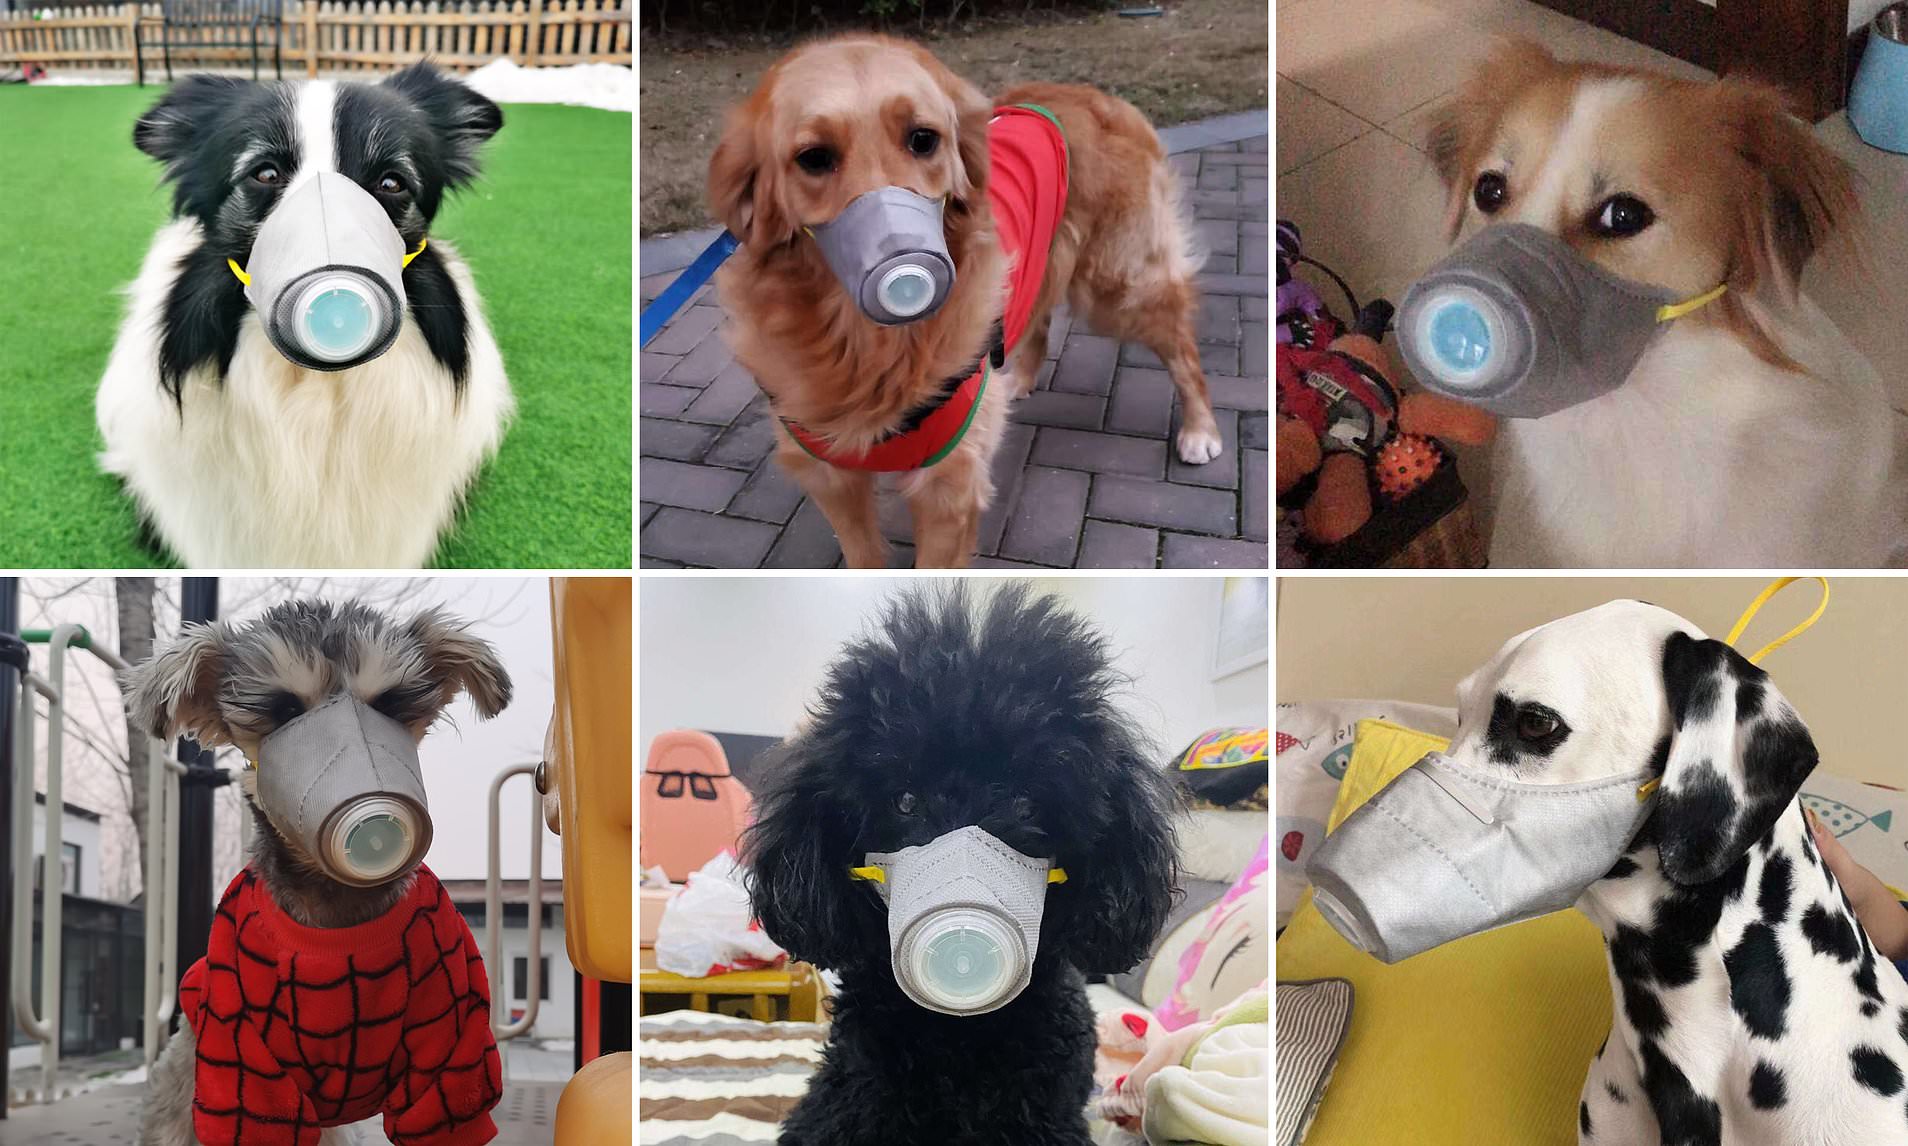 See the Pictures of Pets Wearing Masks In China Due To Coronavirus Terror